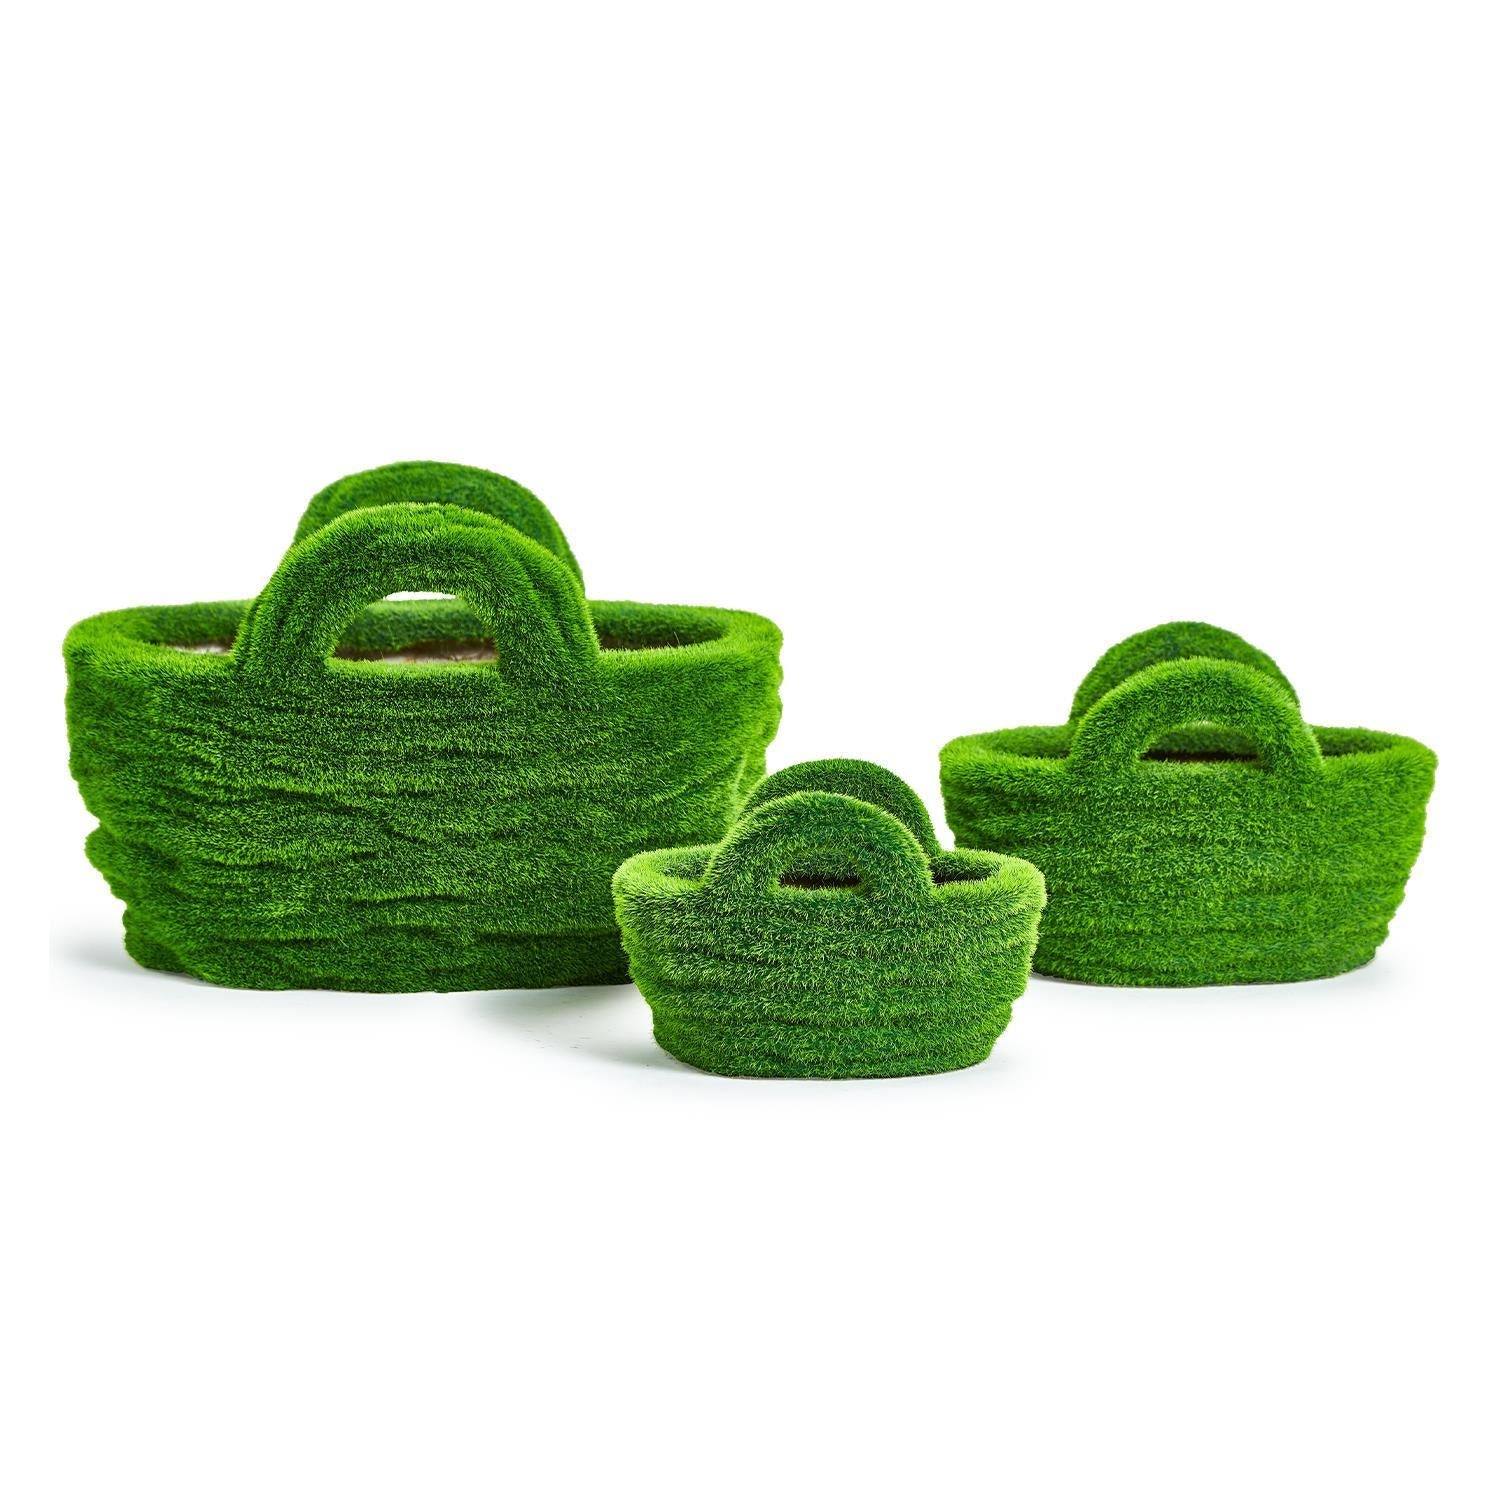 Set of 3 Faux Moss Baskets Includes 3 Sizes